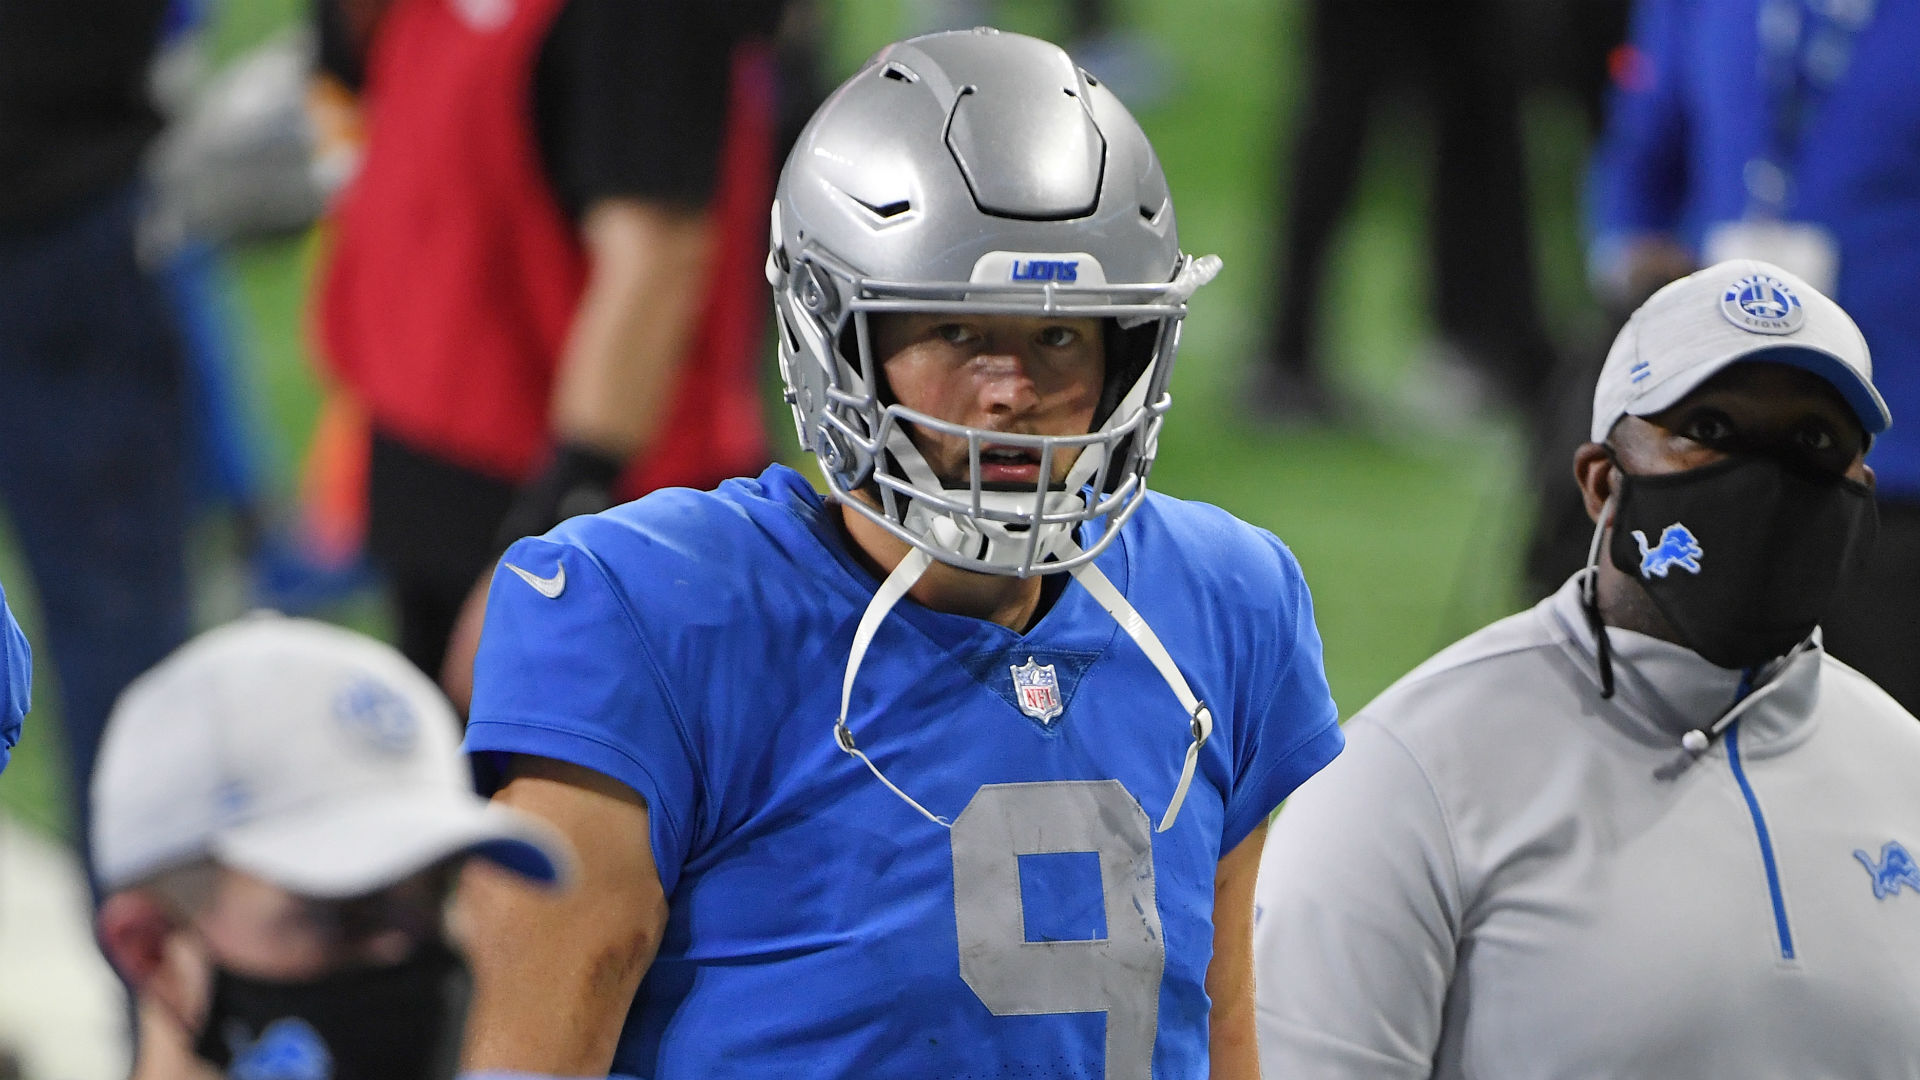 The Detroit Lions will reportedly discuss a trade for quarterback Matthew Stafford.